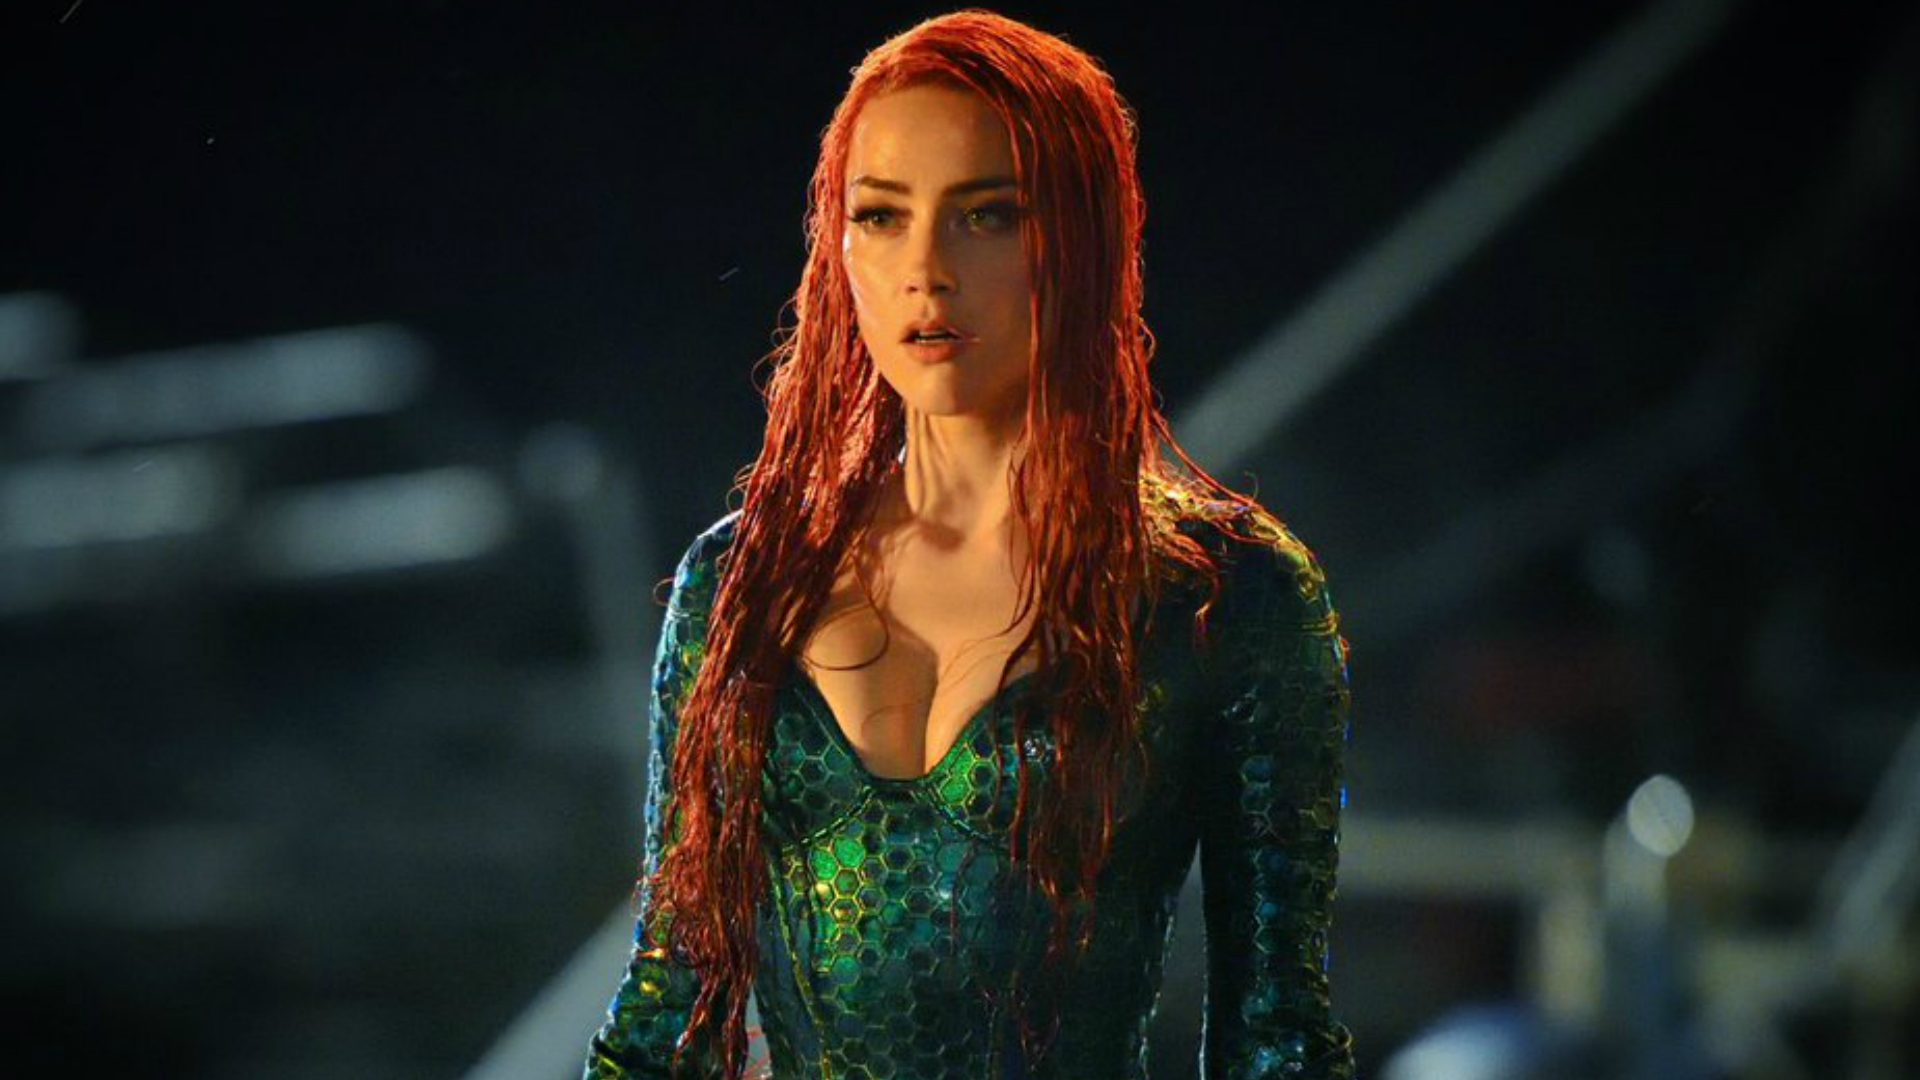 Mera’s Outfit in Aquaman Looks Great But Uncomfortable As Hell